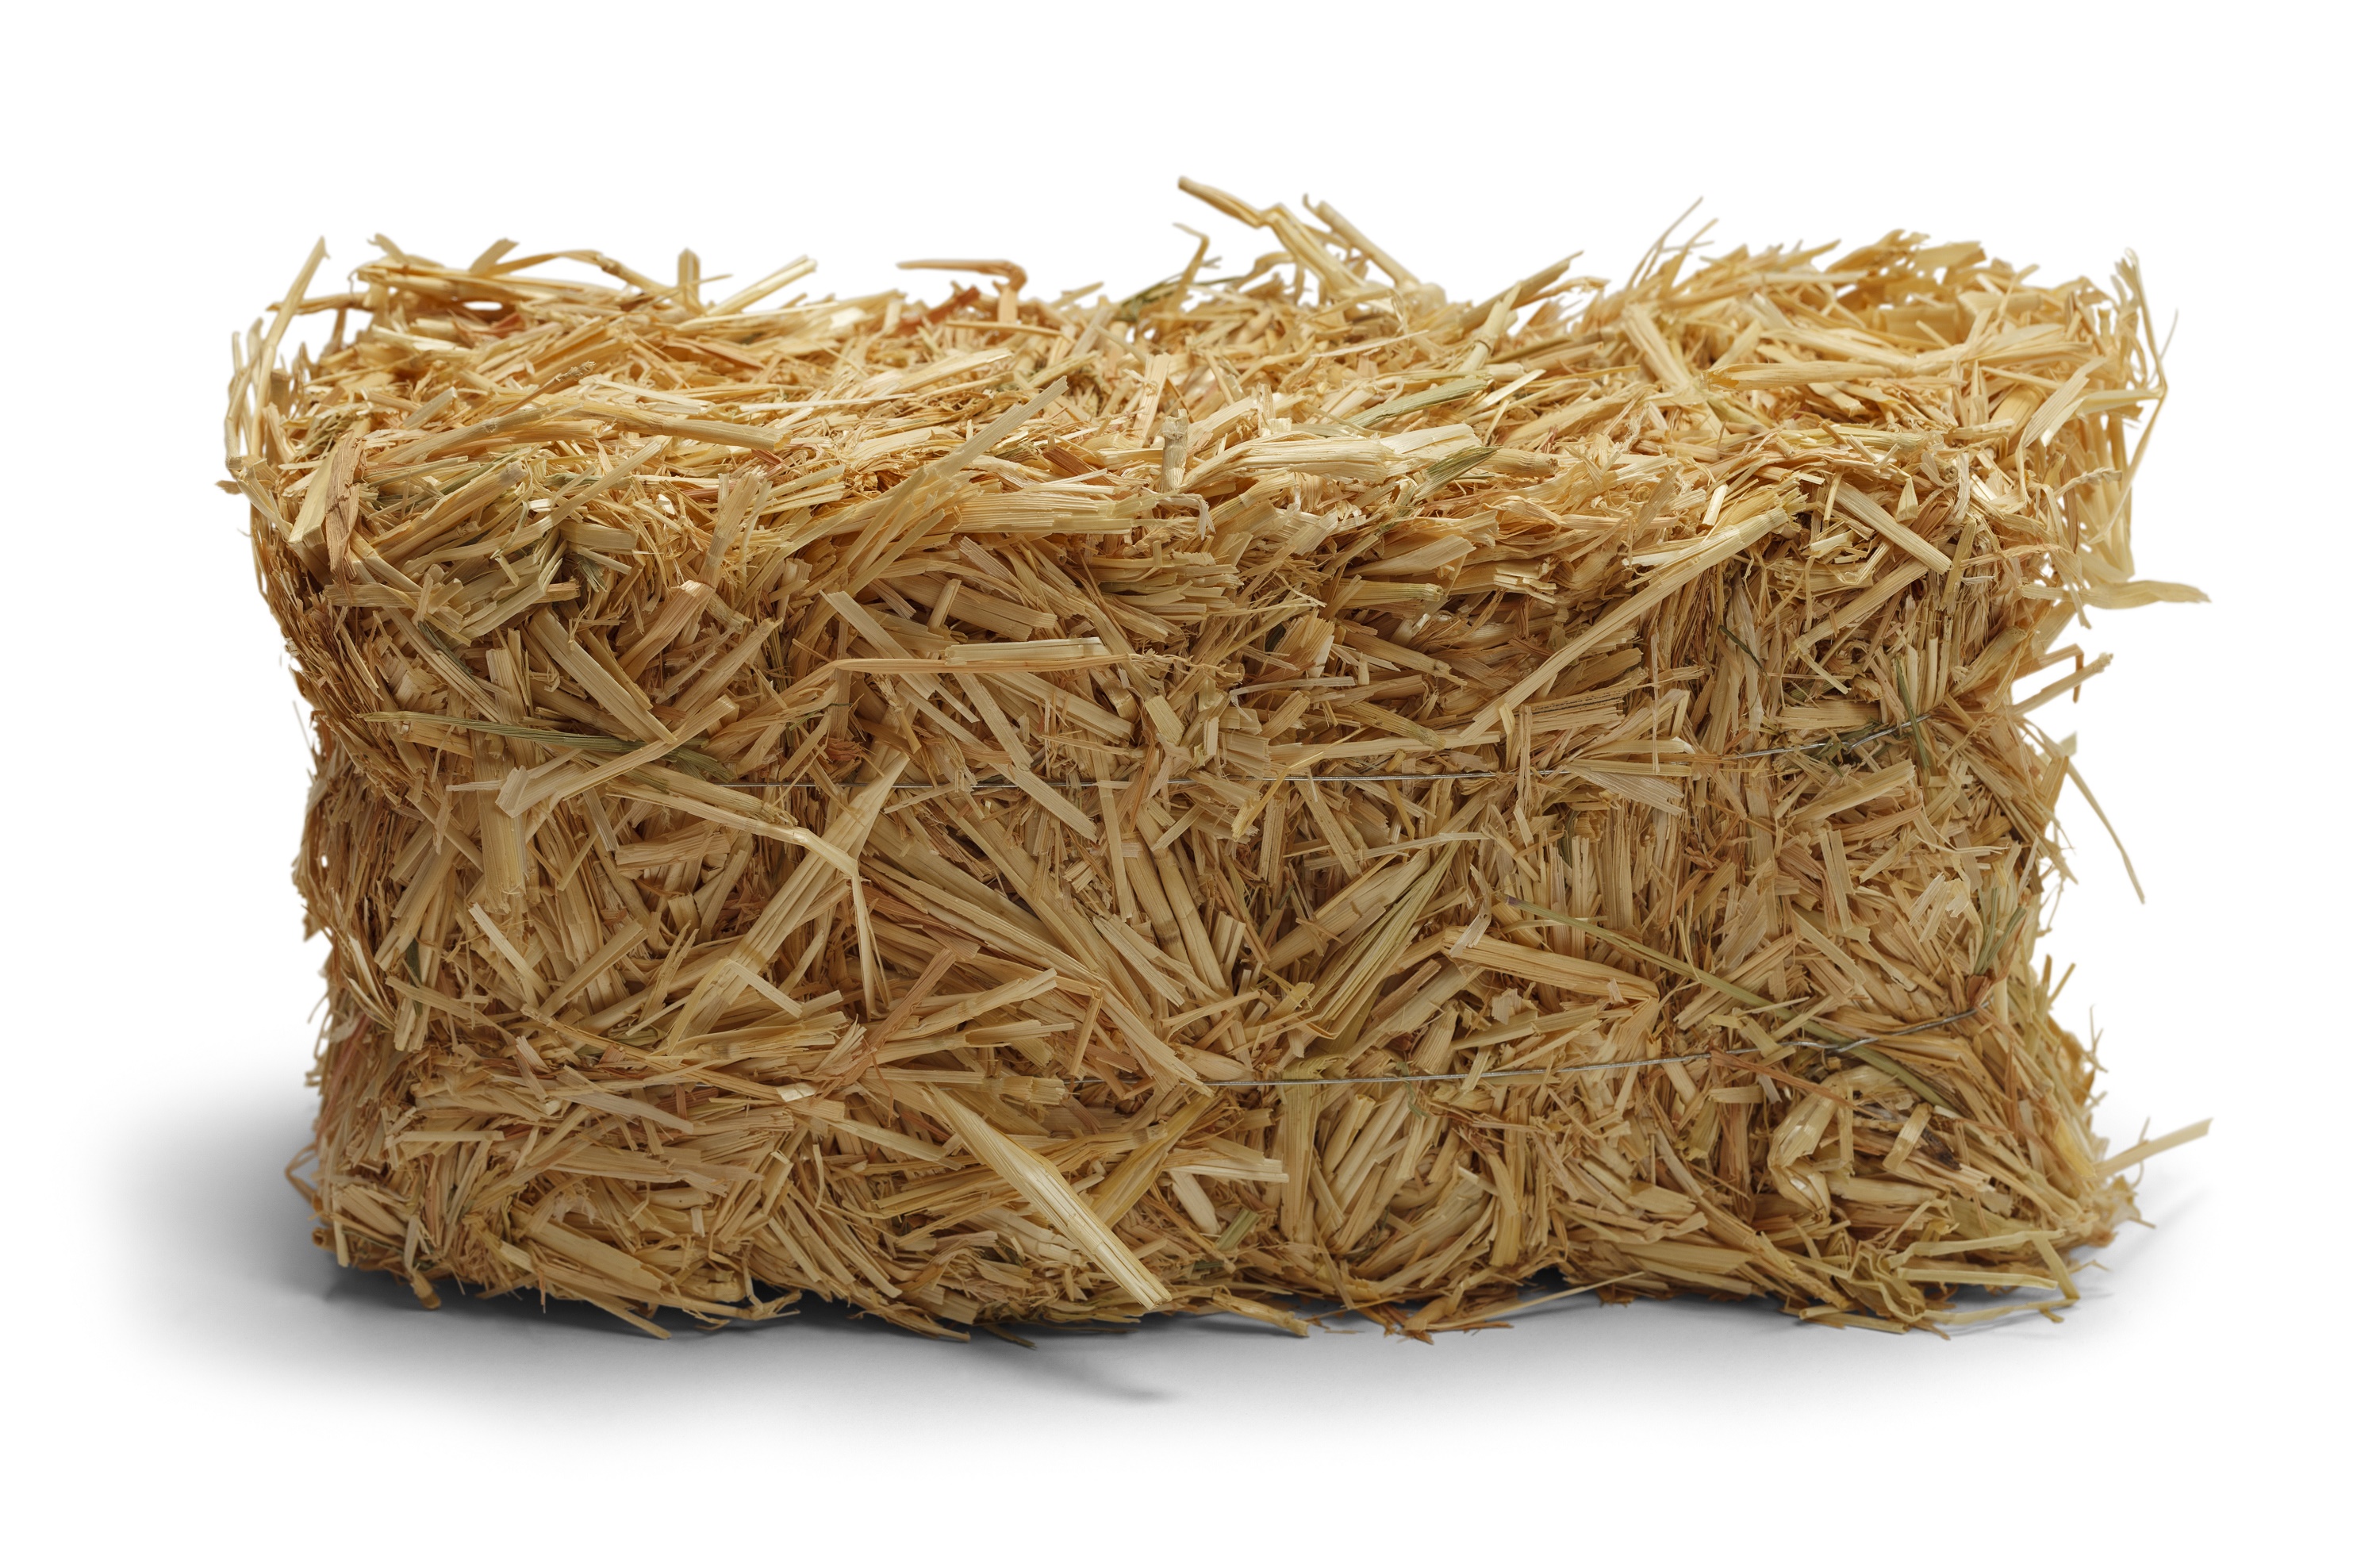 Pick Up Straw Bales At Wells BrothersWells Brothers Pet, Lawn ...